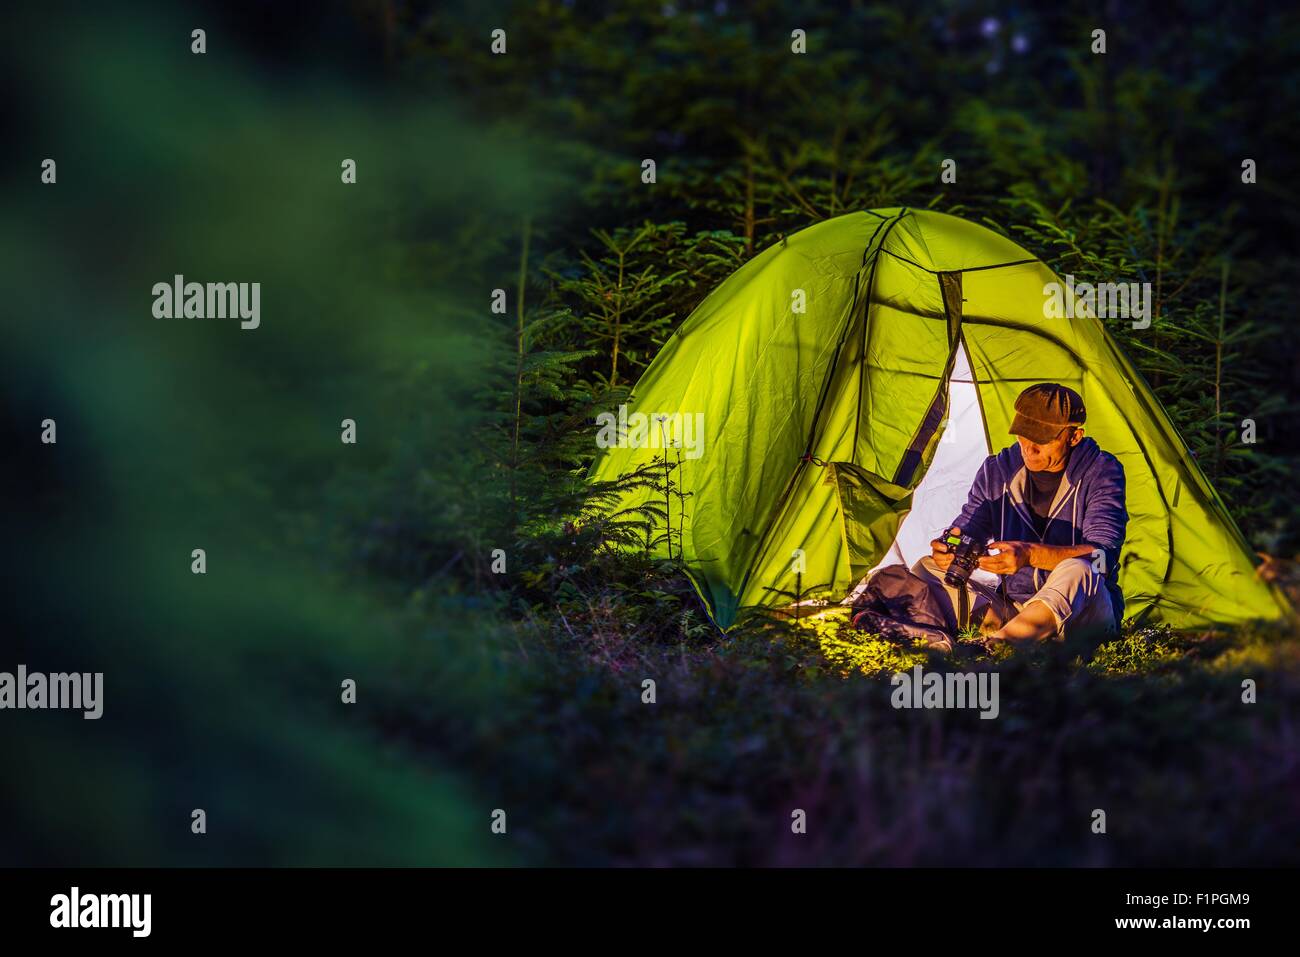 Overnight Forest Camping. Middle Age Caucasian Hiker with His Digital Camera and the Illuminated at Night Green Tent. Nighttime Stock Photo